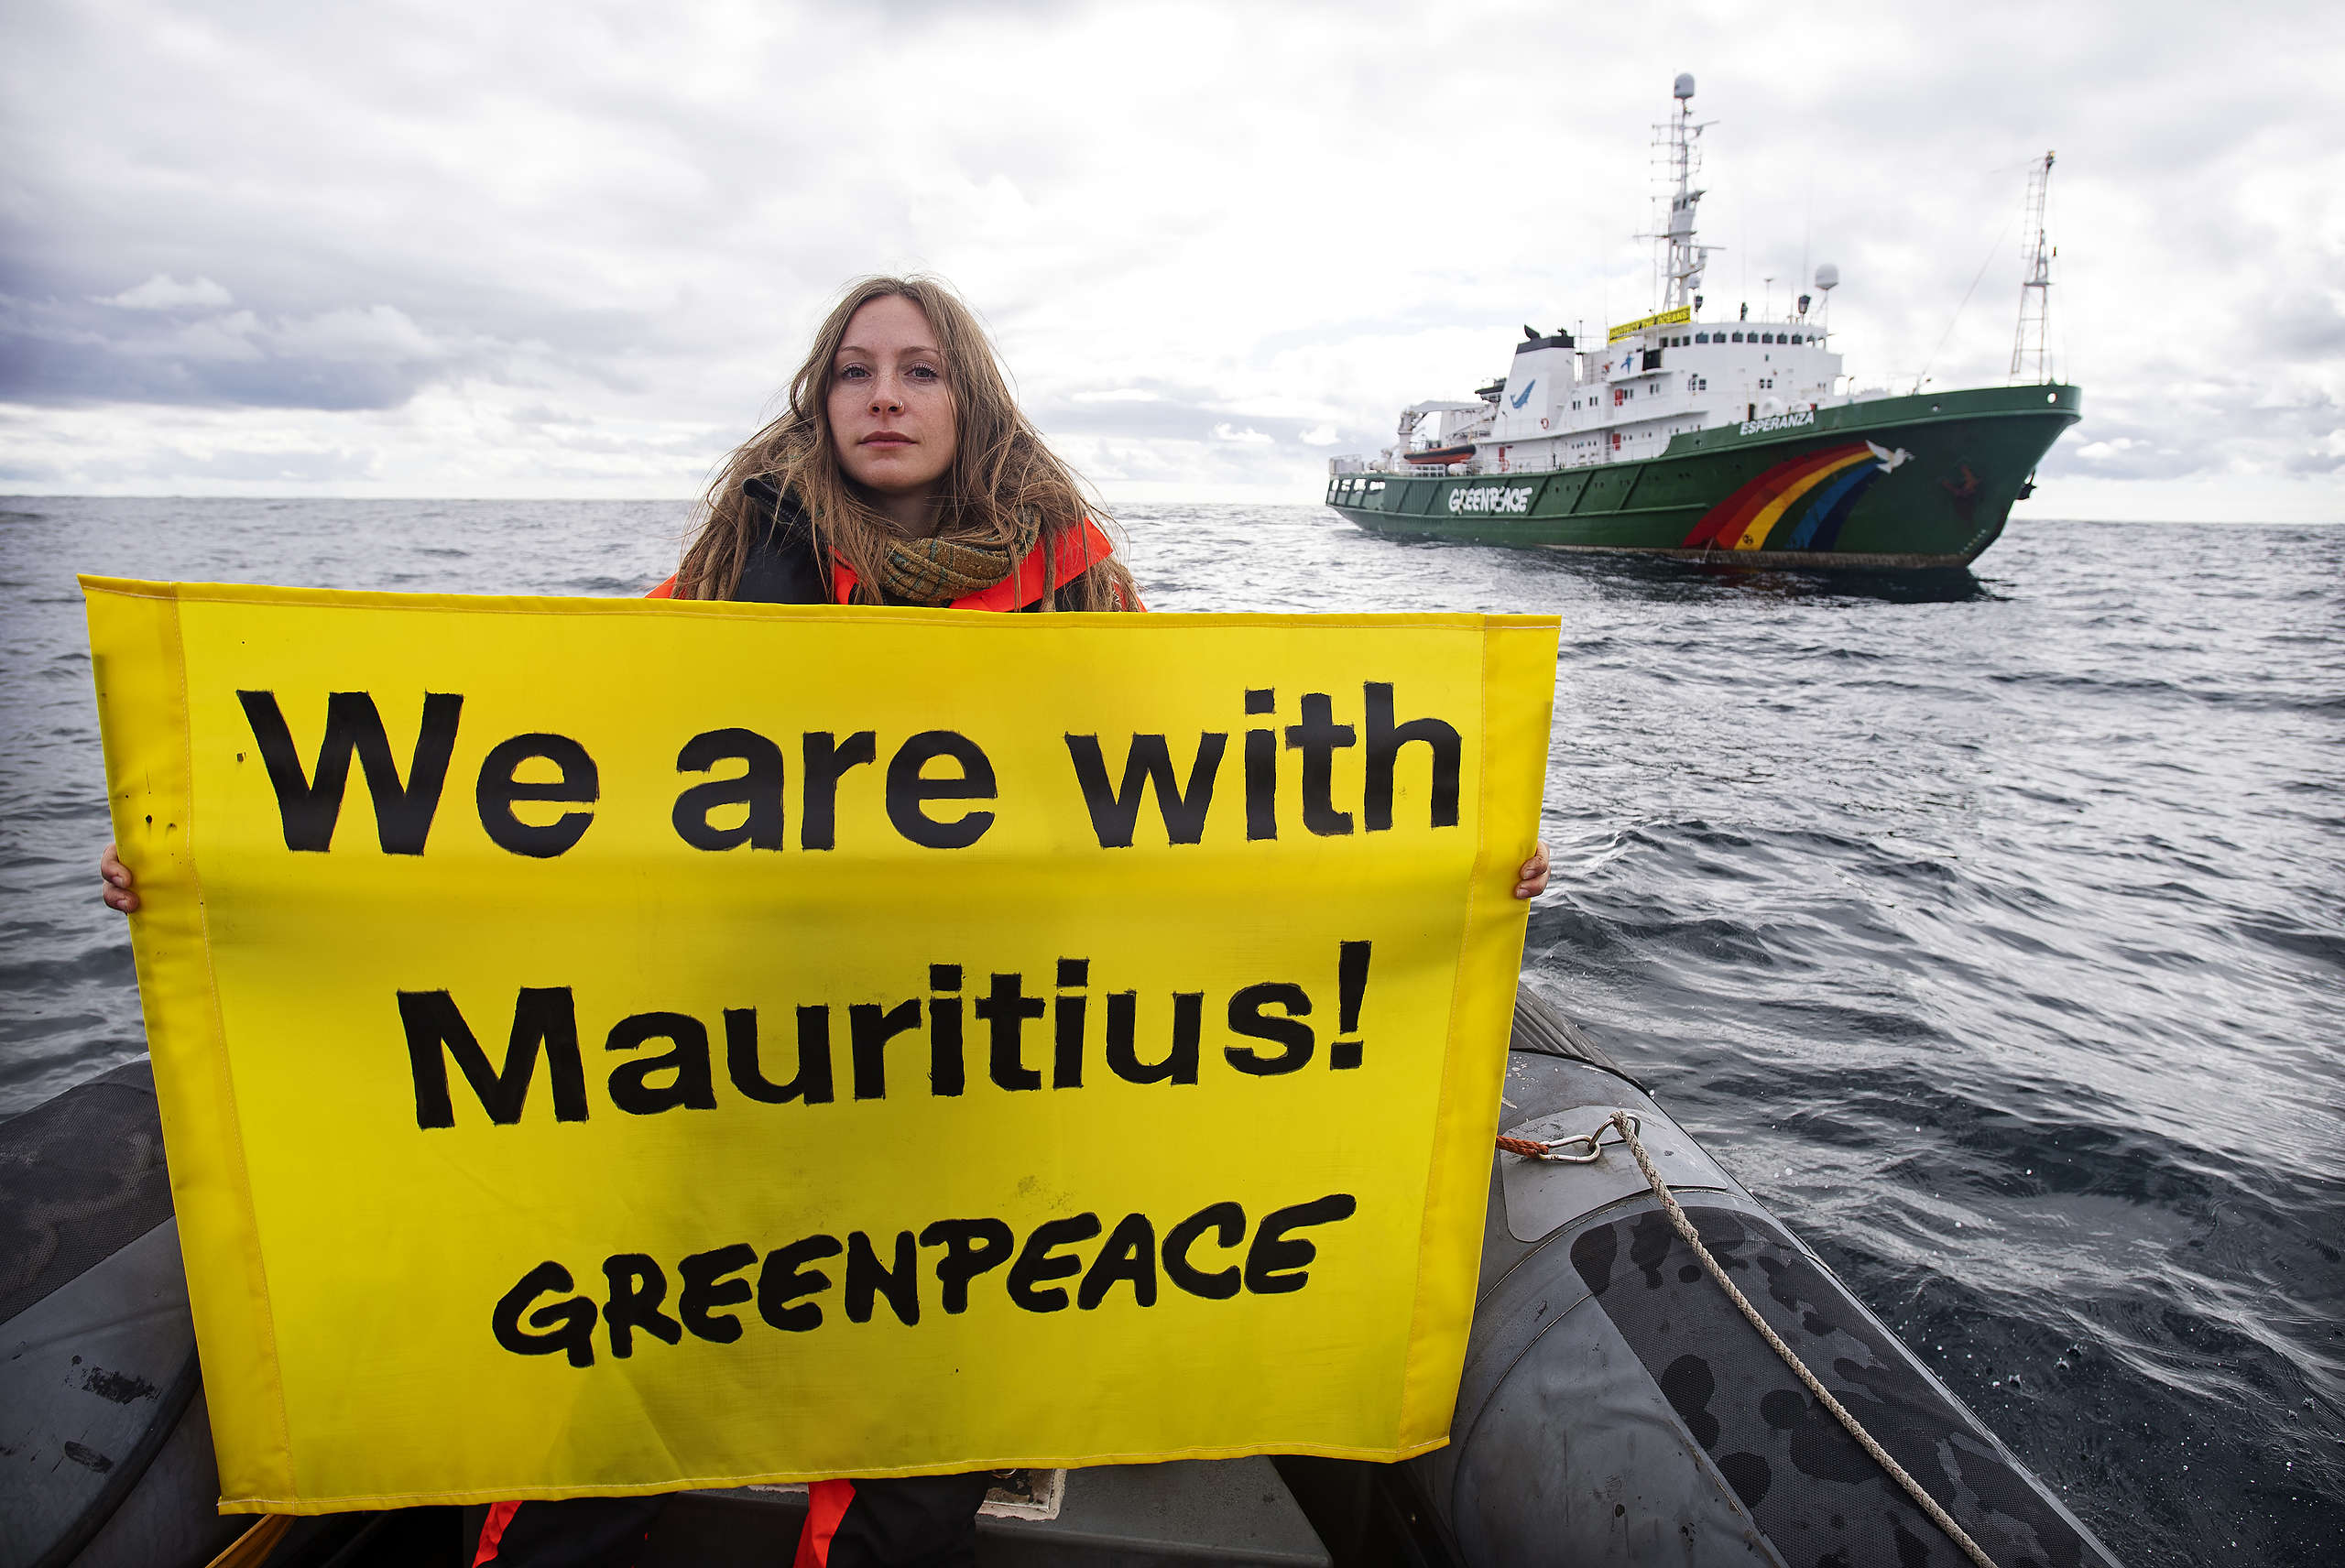 Dead and ailing dolphins on Mauritius' shores: Greenpeace calls for investigation